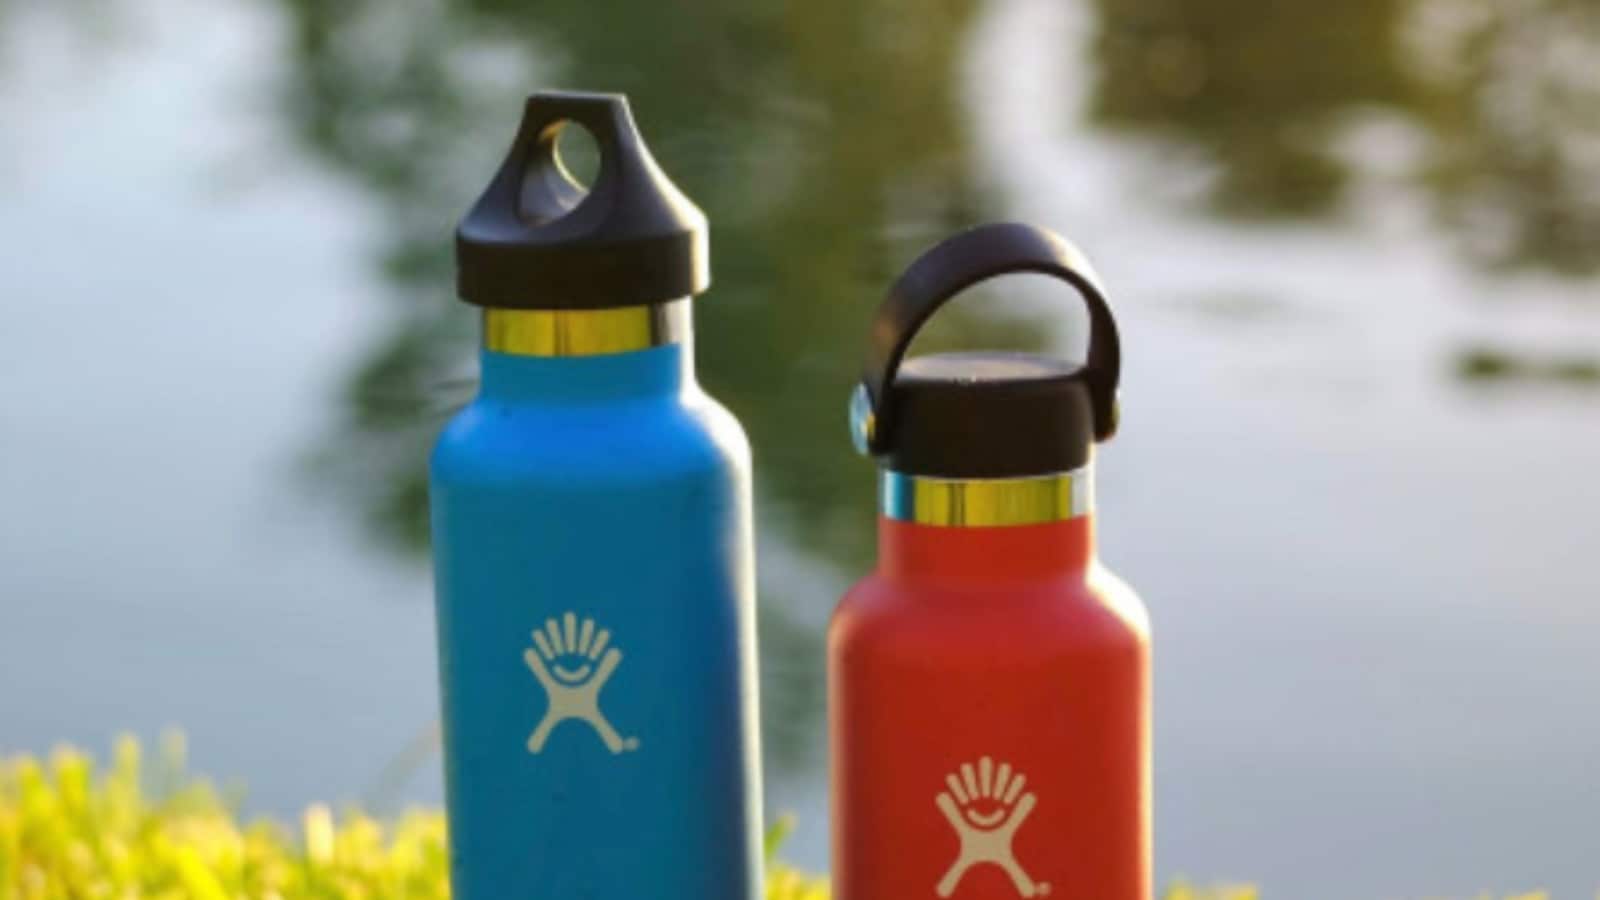  Two Hydro Flask water bottles in blue and red colors are sitting on the green grass near the lake.